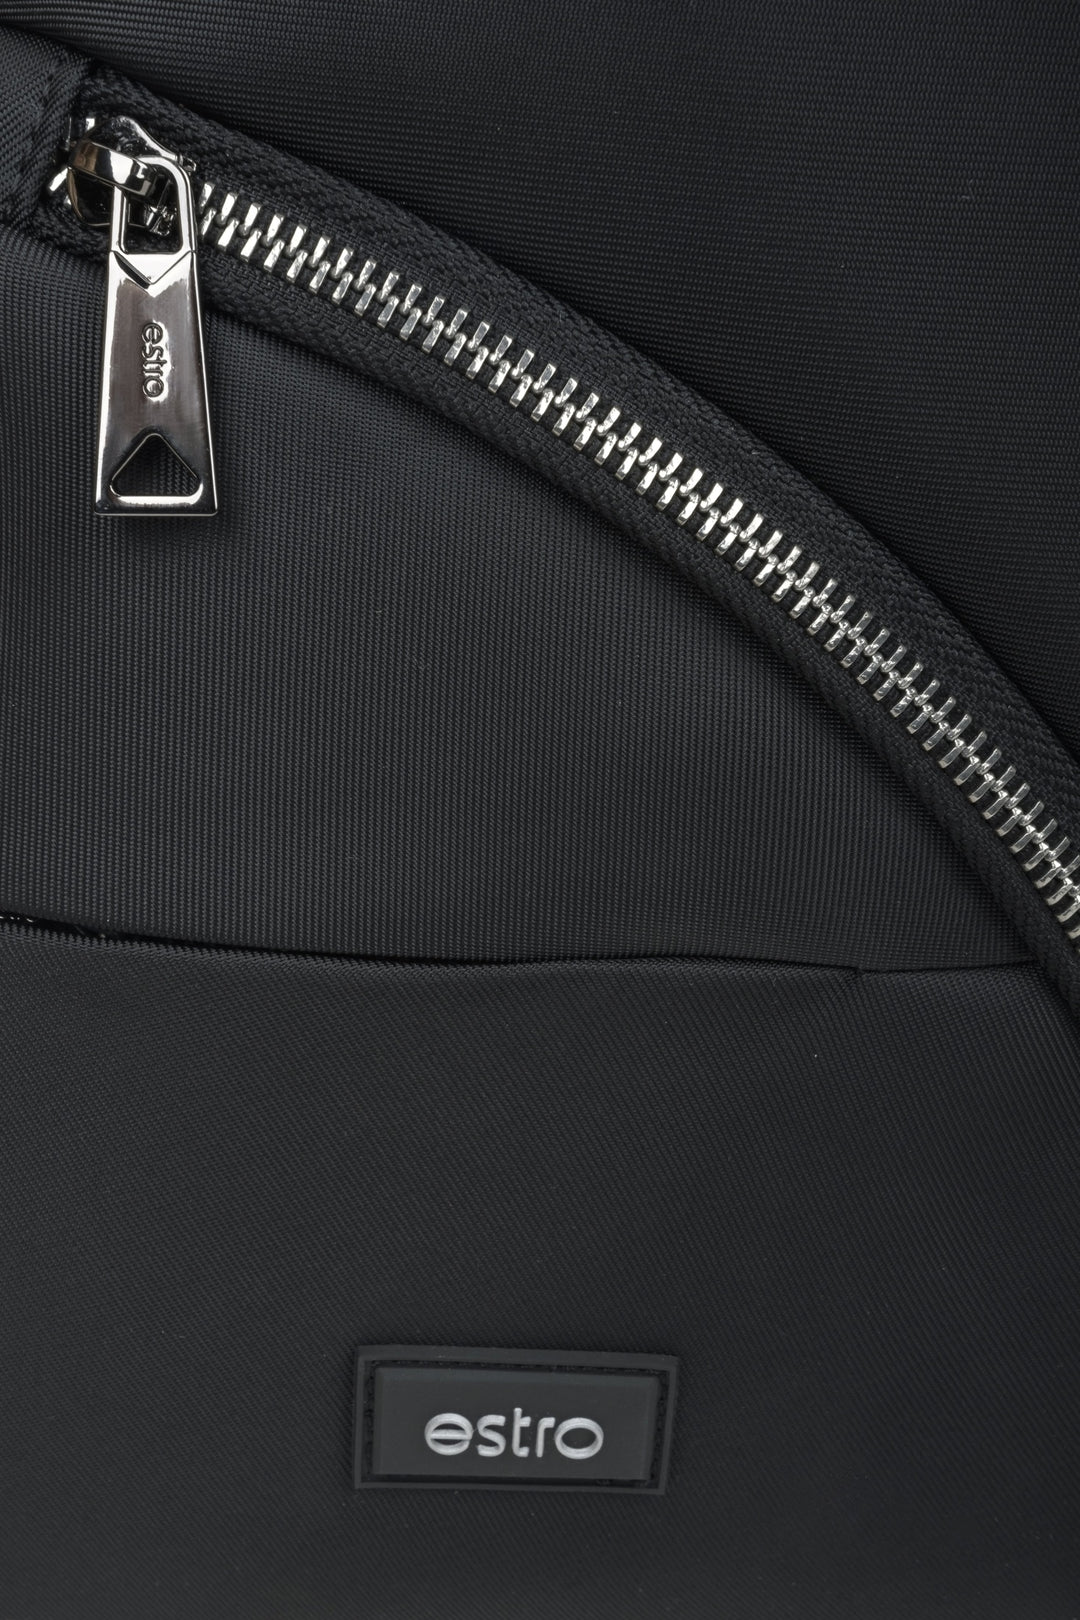 Men's black Estro pouch with silver hardware - close-up on the details.